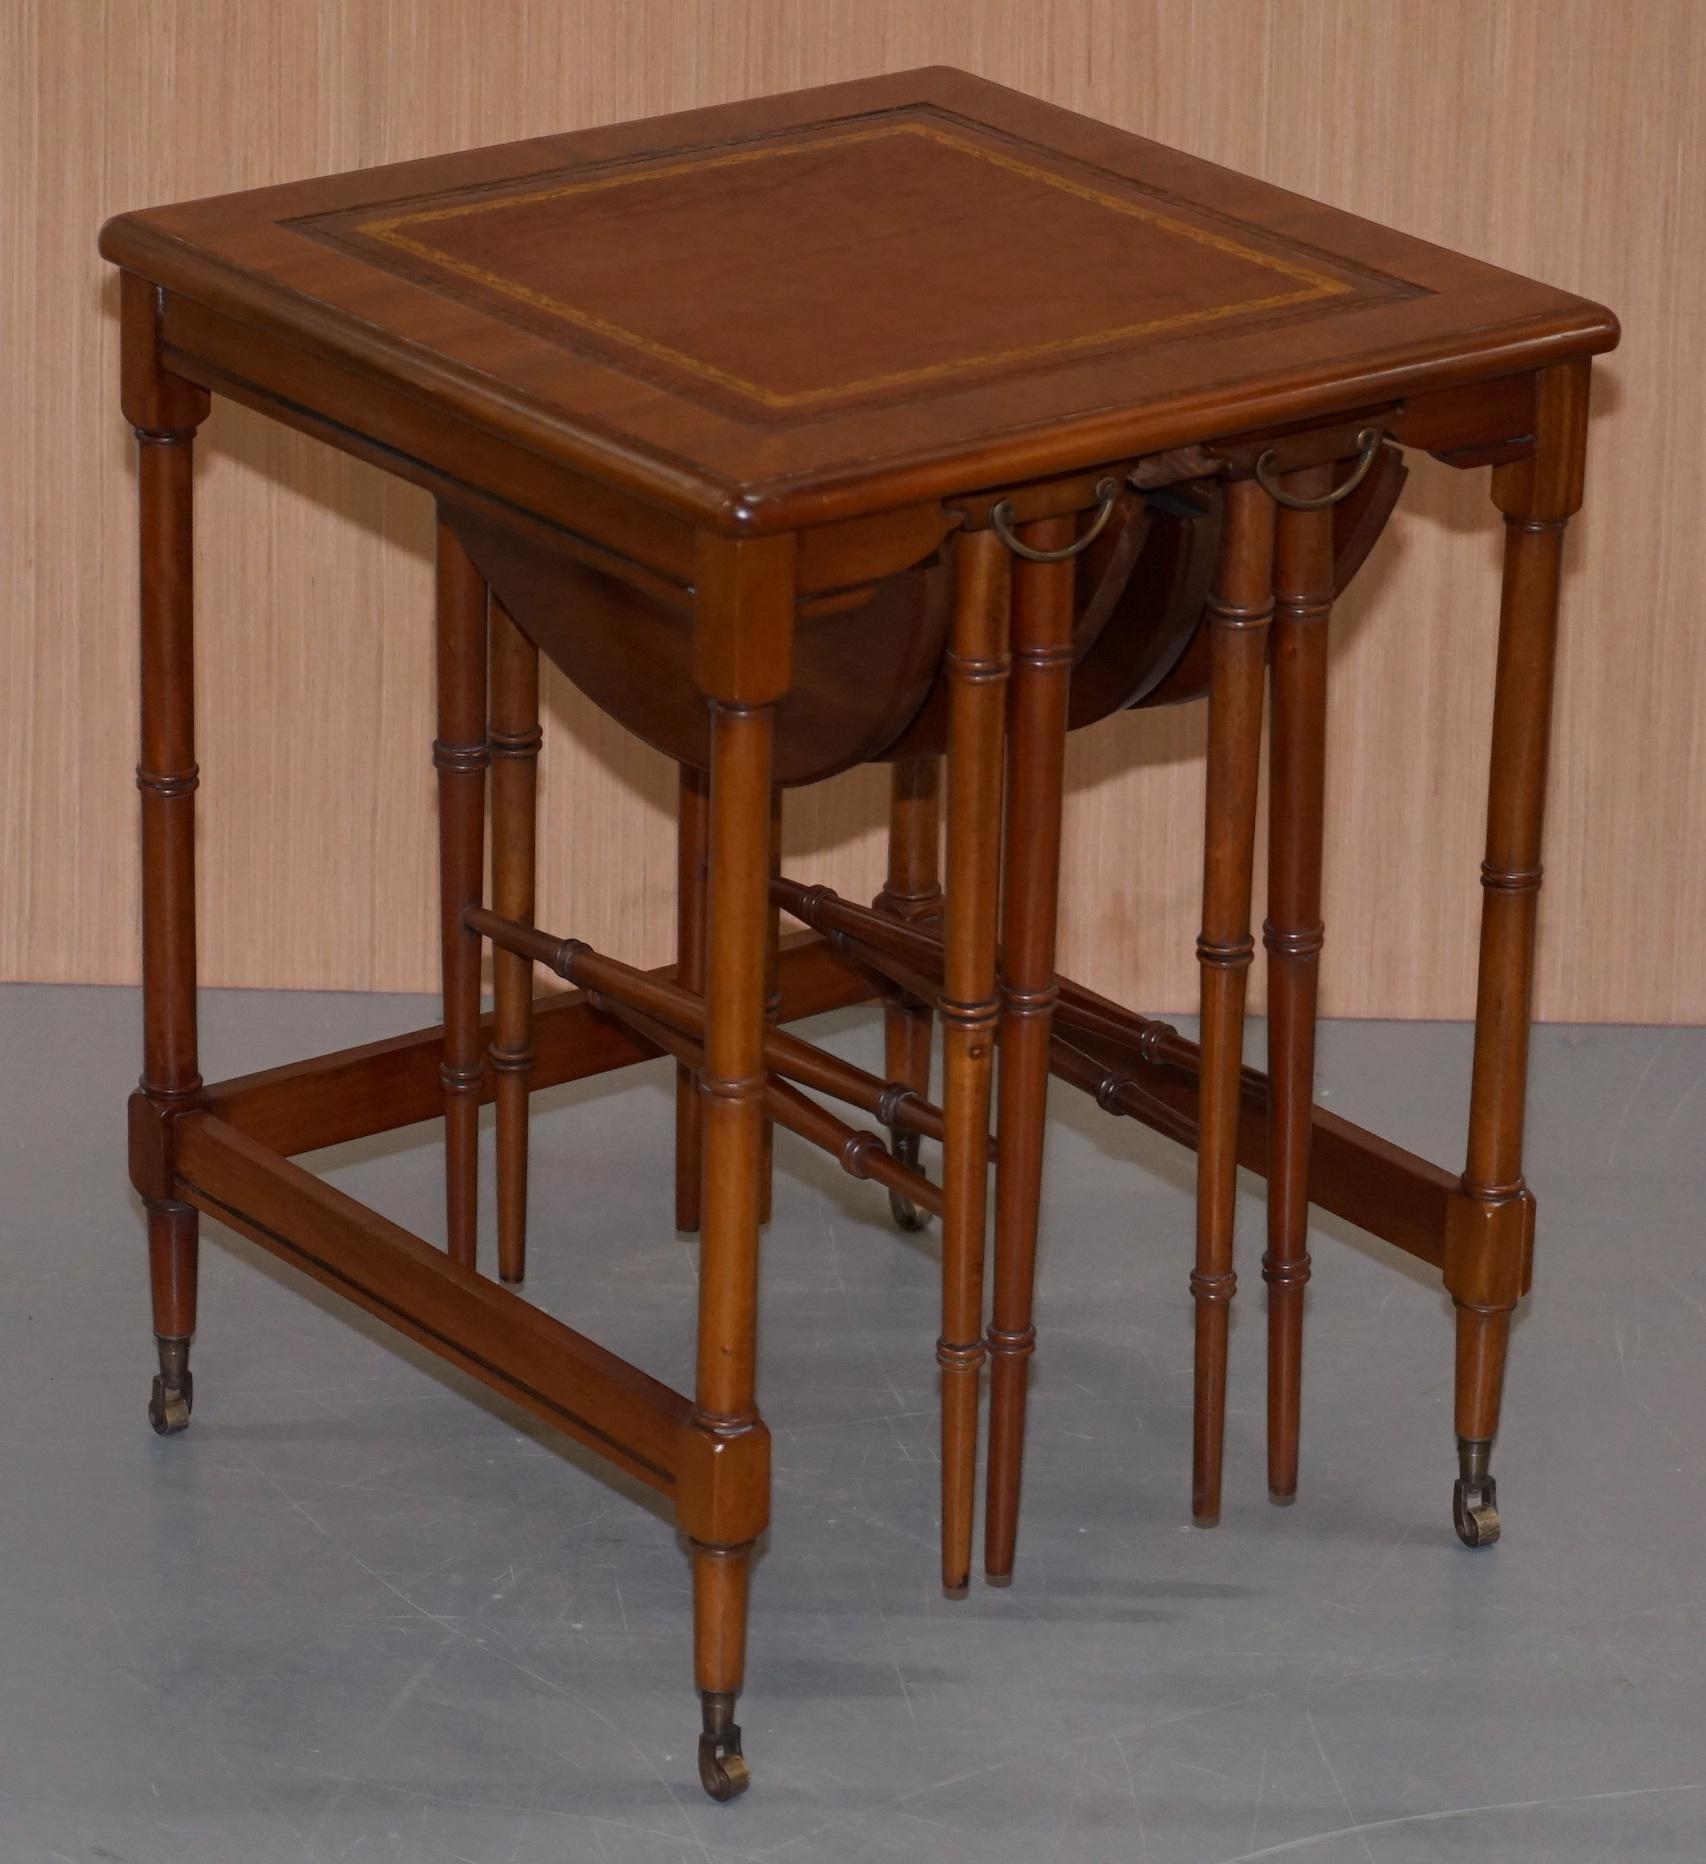 English Rare Pair of Military Campaign Side Tables with Two Folded Round Tables Nested